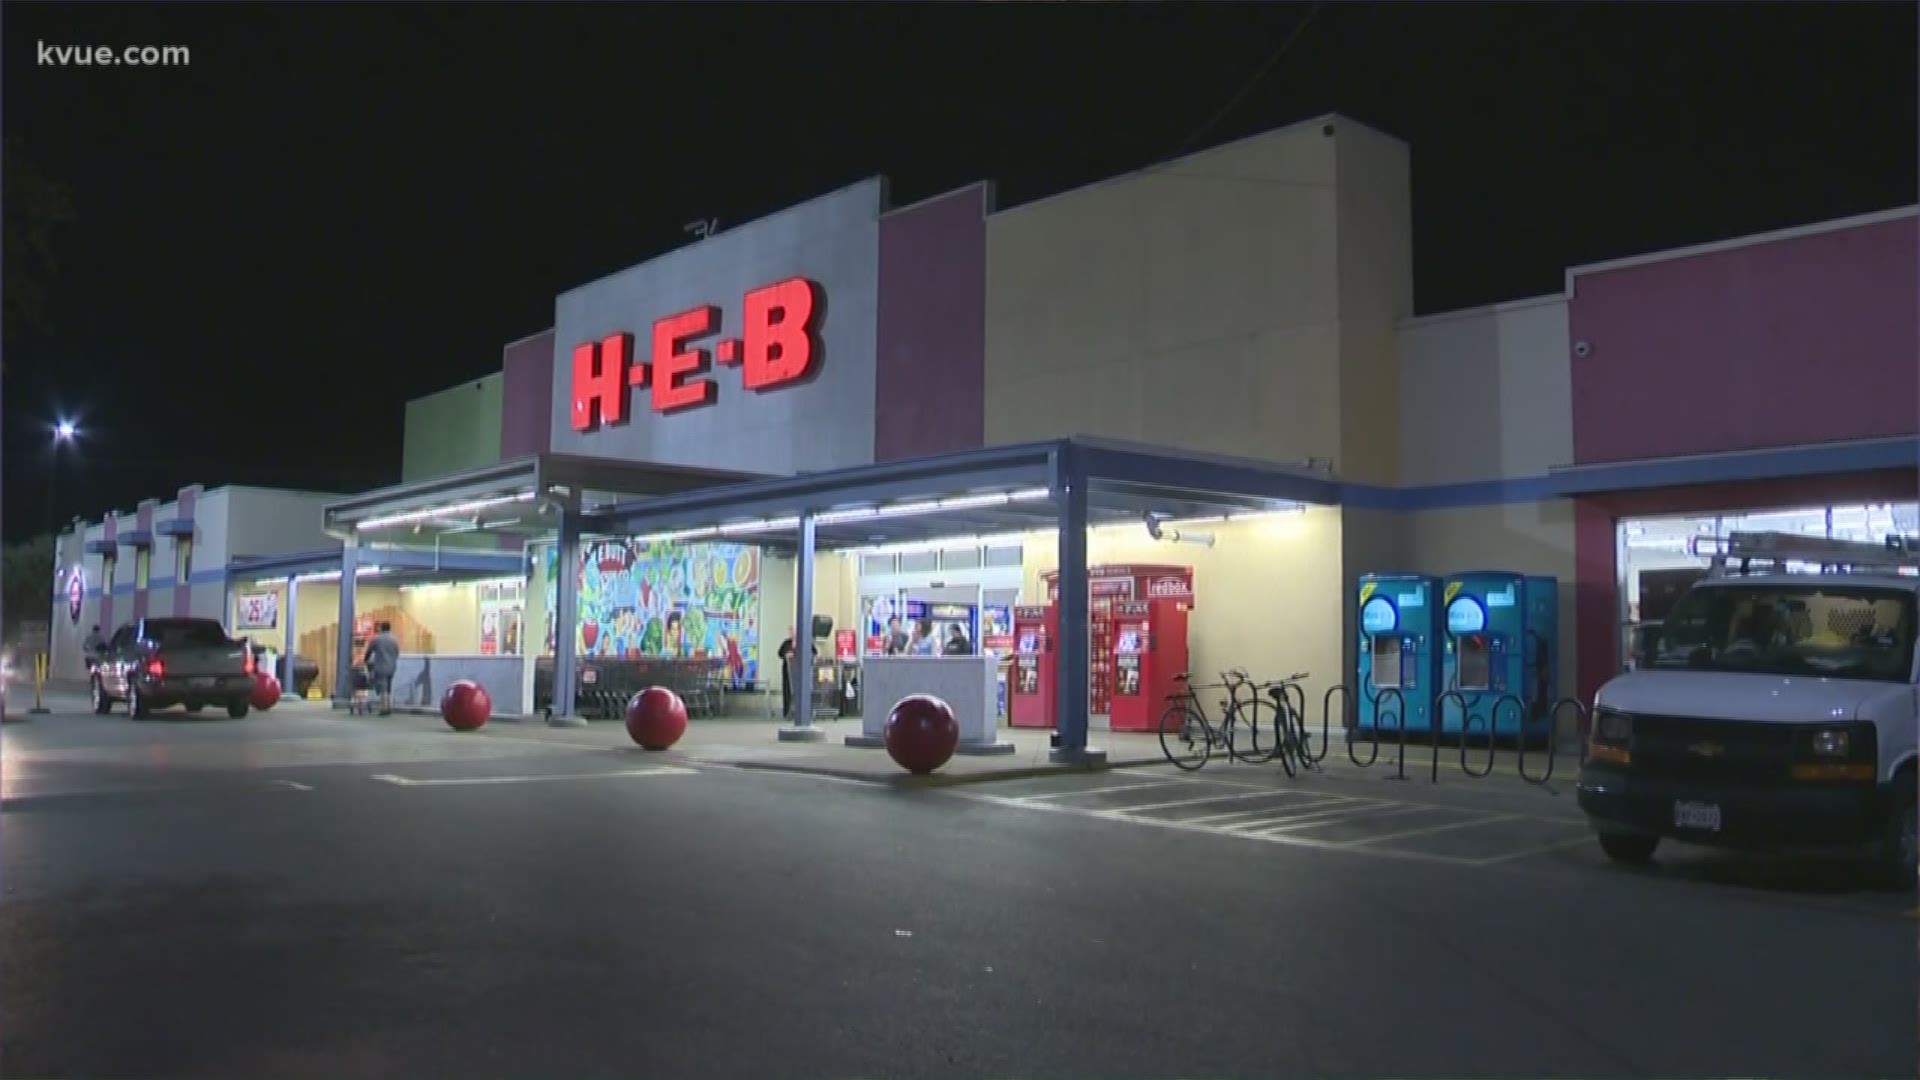 South Austin is growing – and H-E-B is getting in on the action.